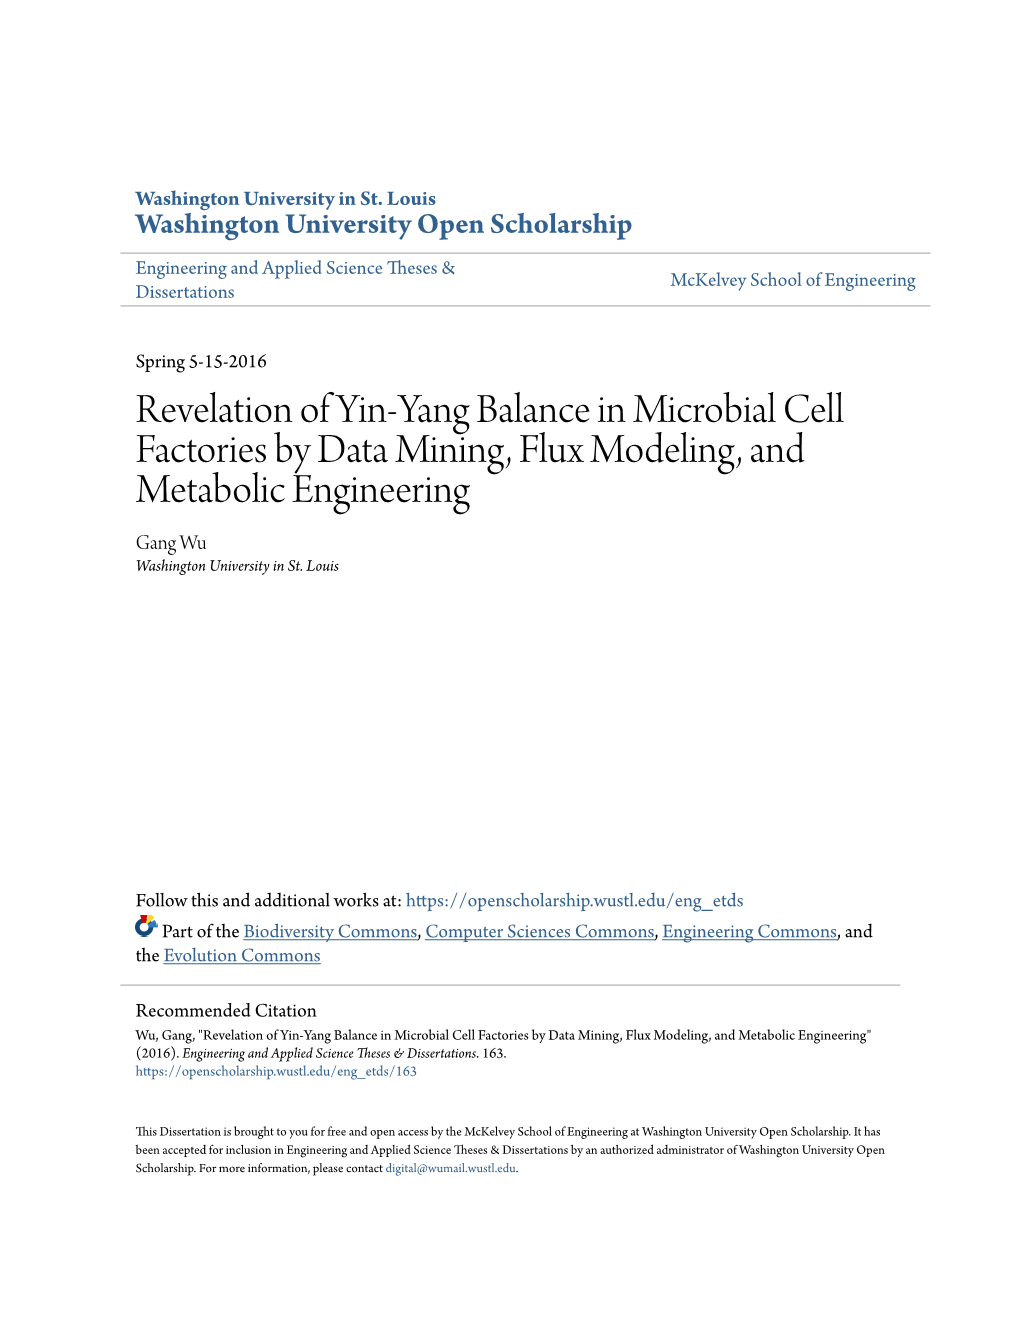 Revelation of Yin-Yang Balance in Microbial Cell Factories by Data Mining, Flux Modeling, and Metabolic Engineering Gang Wu Washington University in St